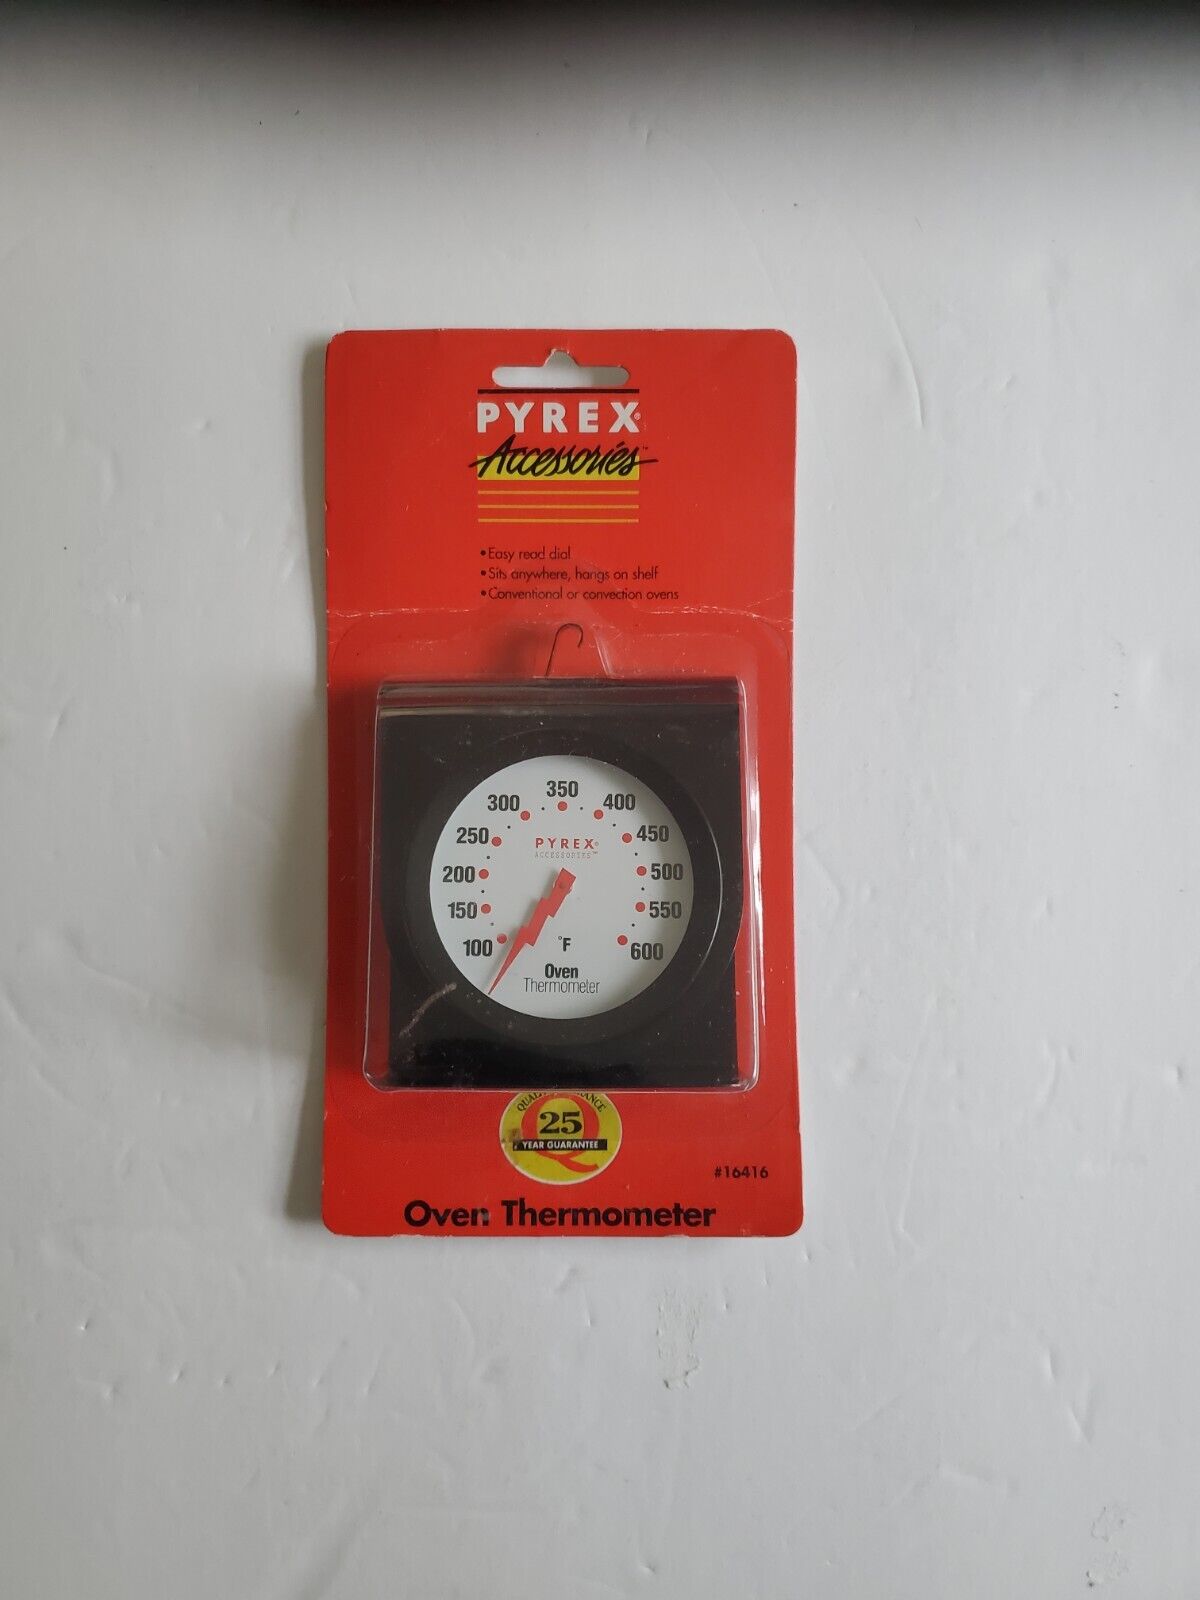 Pyrex Accessories Oven Thermometer 1996 25yr Guarantee Corning Inc. NEW